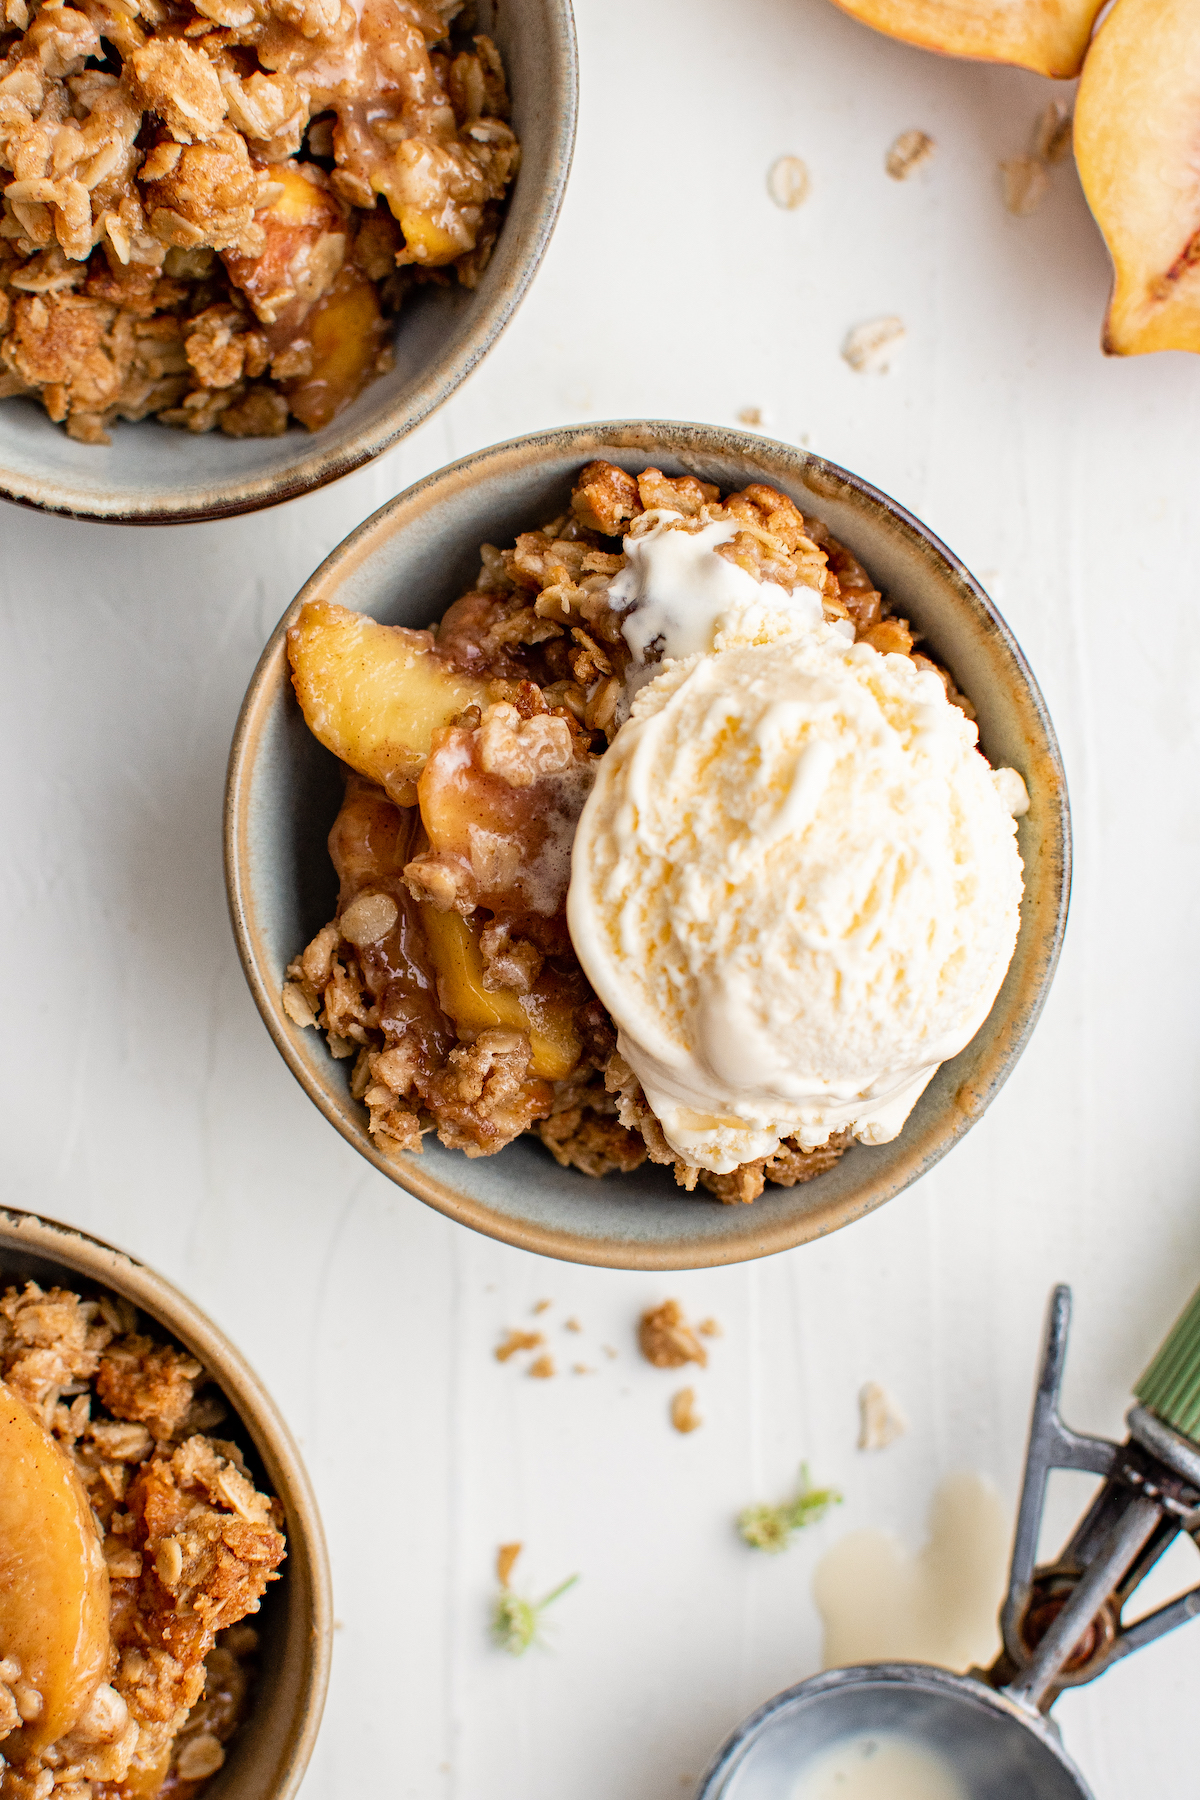 Peaches and oat topping with a scoop of ice cream on top, in a small bowl.